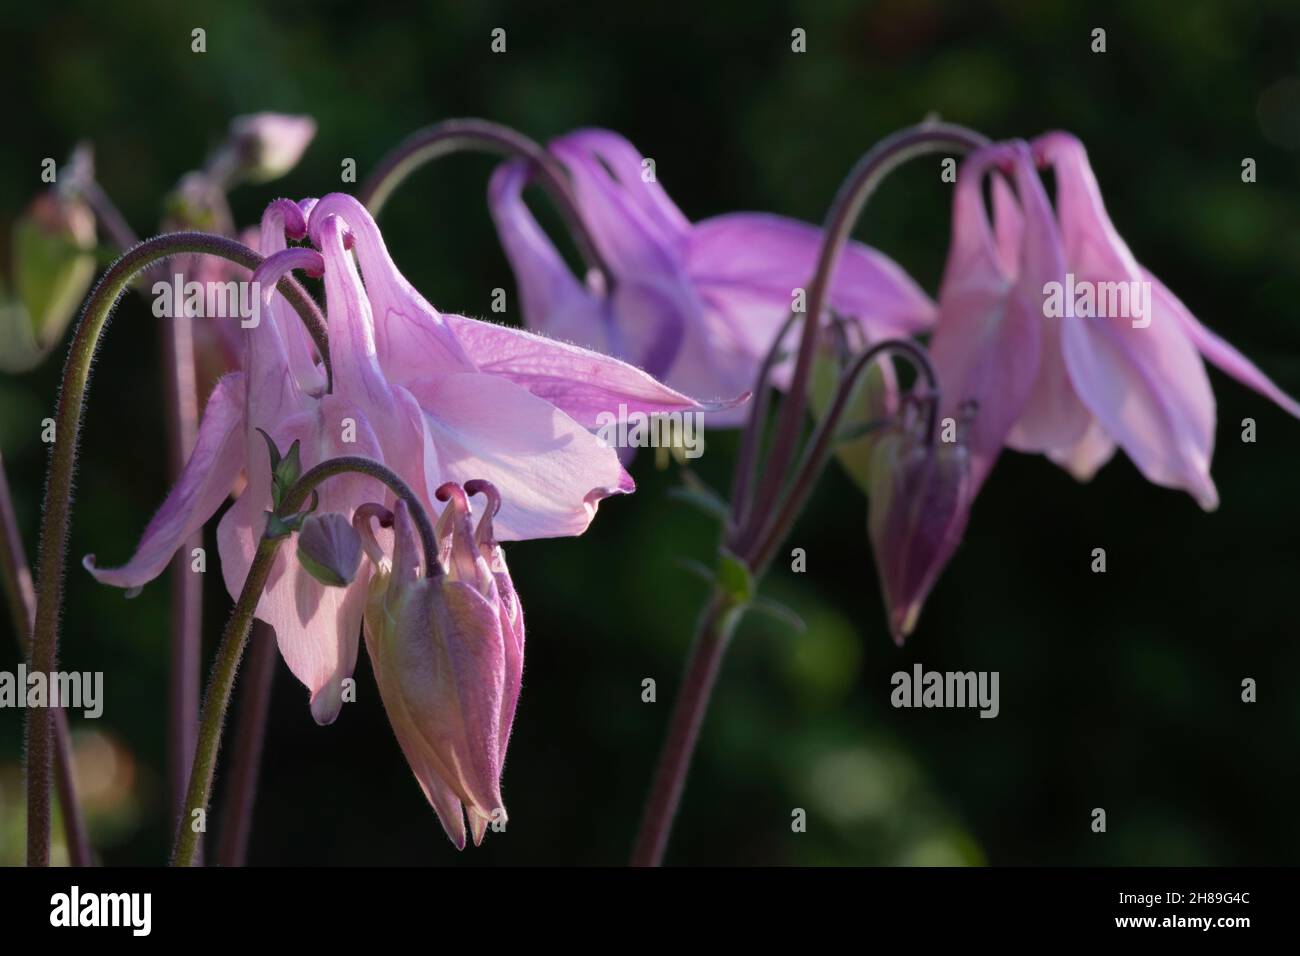 A Close-Up of a Small Group of Purple & Pink Common Columbine (Aquilegia Vulgaris) Flower Heads Against a Dark Background Stock Photo